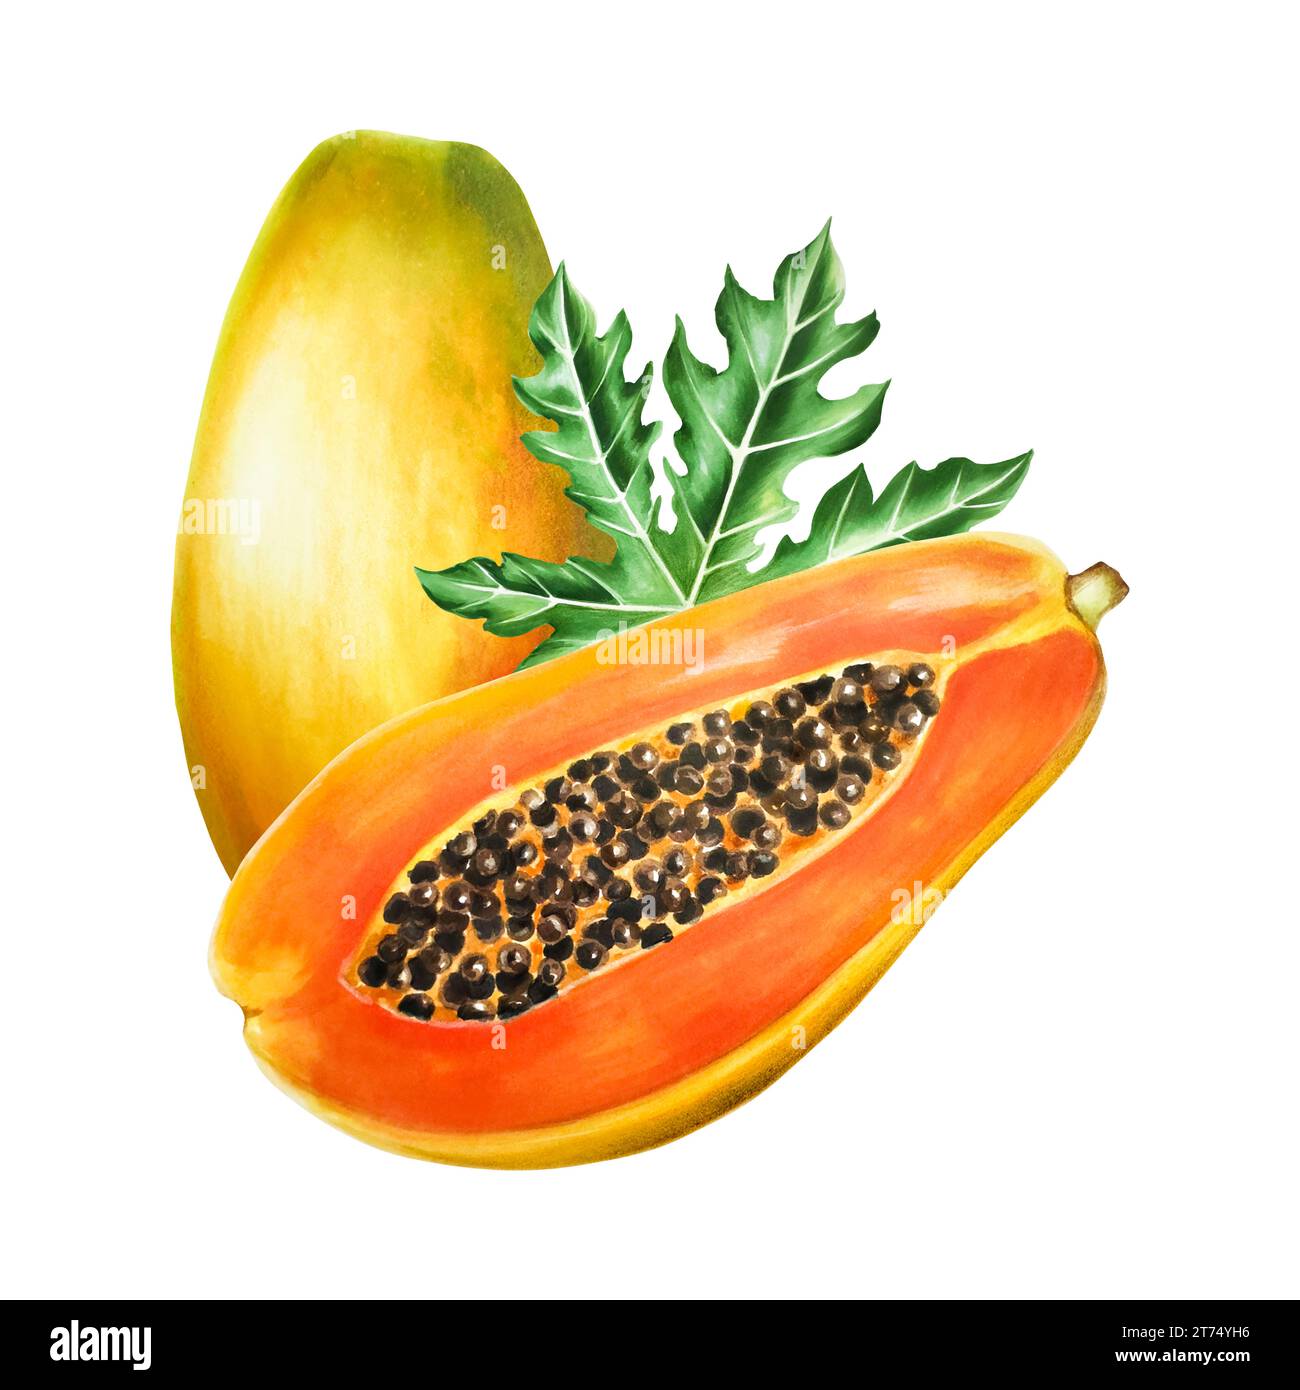 Vector Sketch Drawing Illustration of Papaya Isolated on White Background.  Hand Drawn Tropical Fruit Illustration Stock Vector - Illustration of ripe,  natural: 181735750